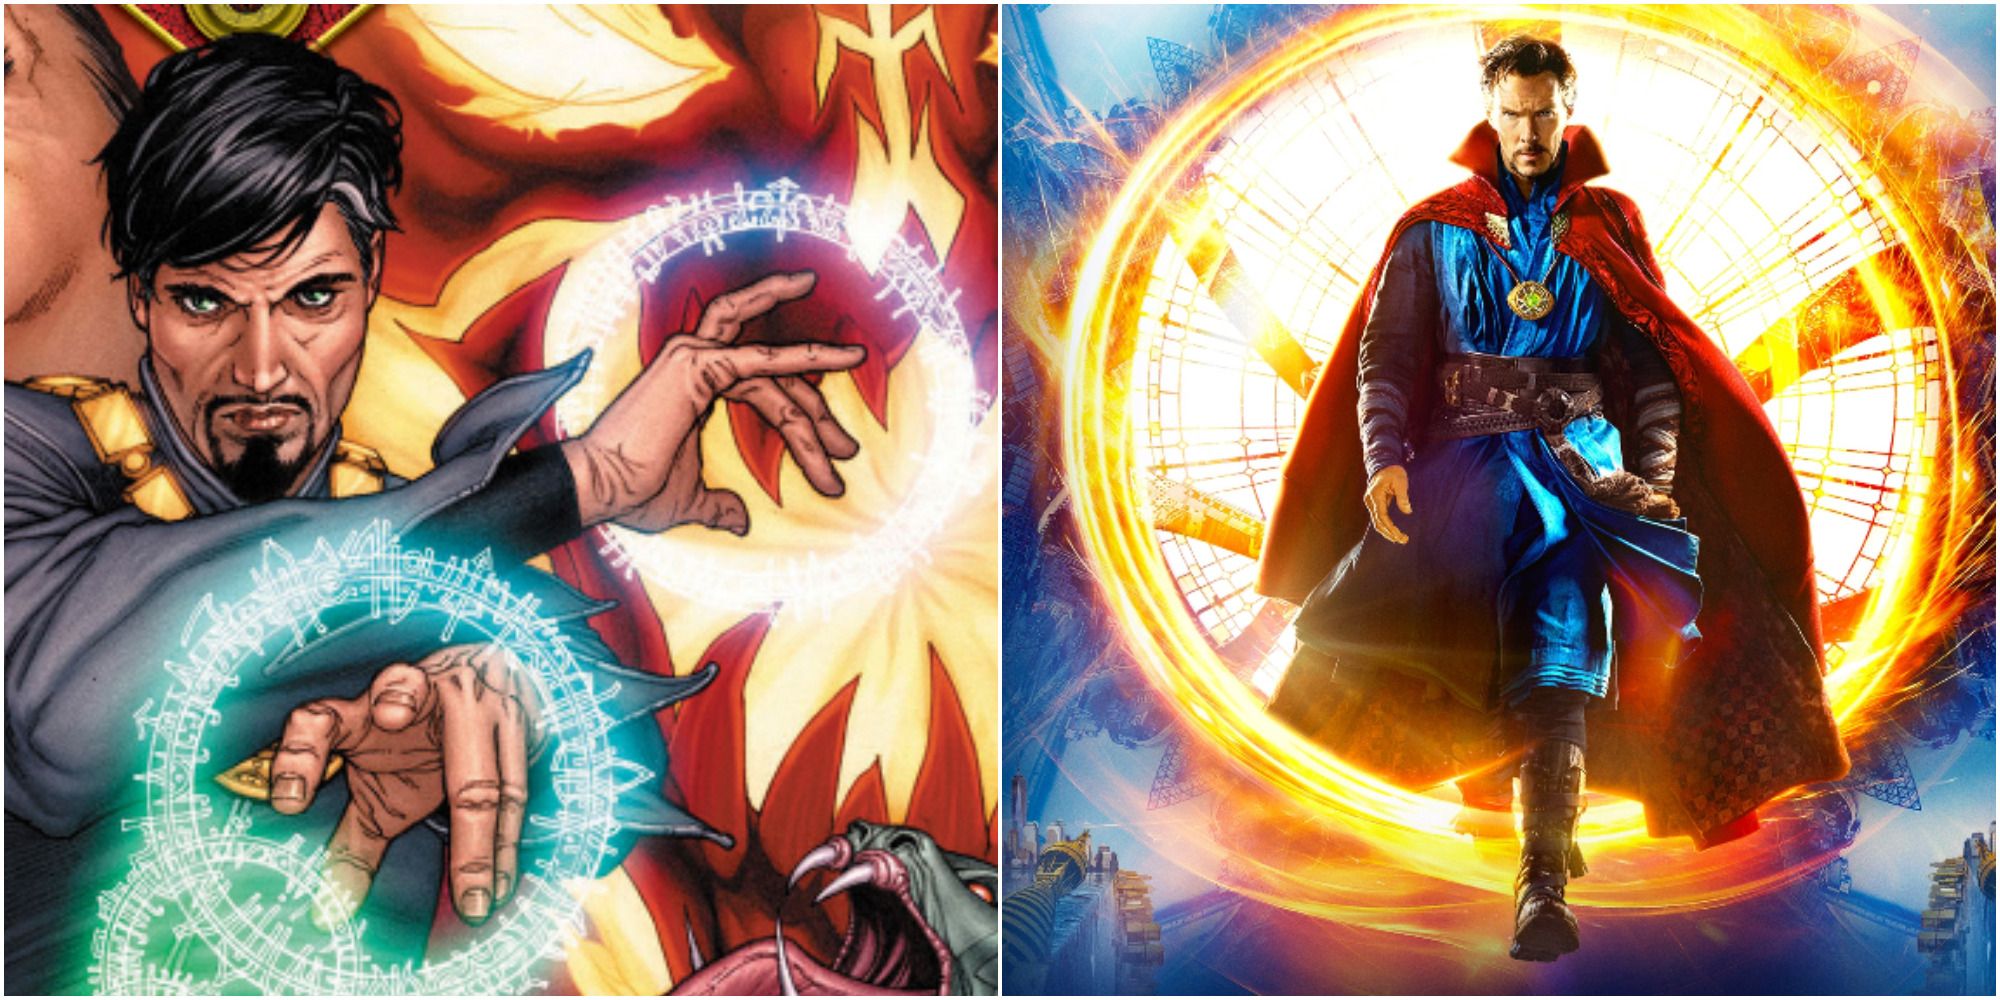 Doctor Strange as he appears in the animated sorcerer supreme movie and the marvel cinematic universe